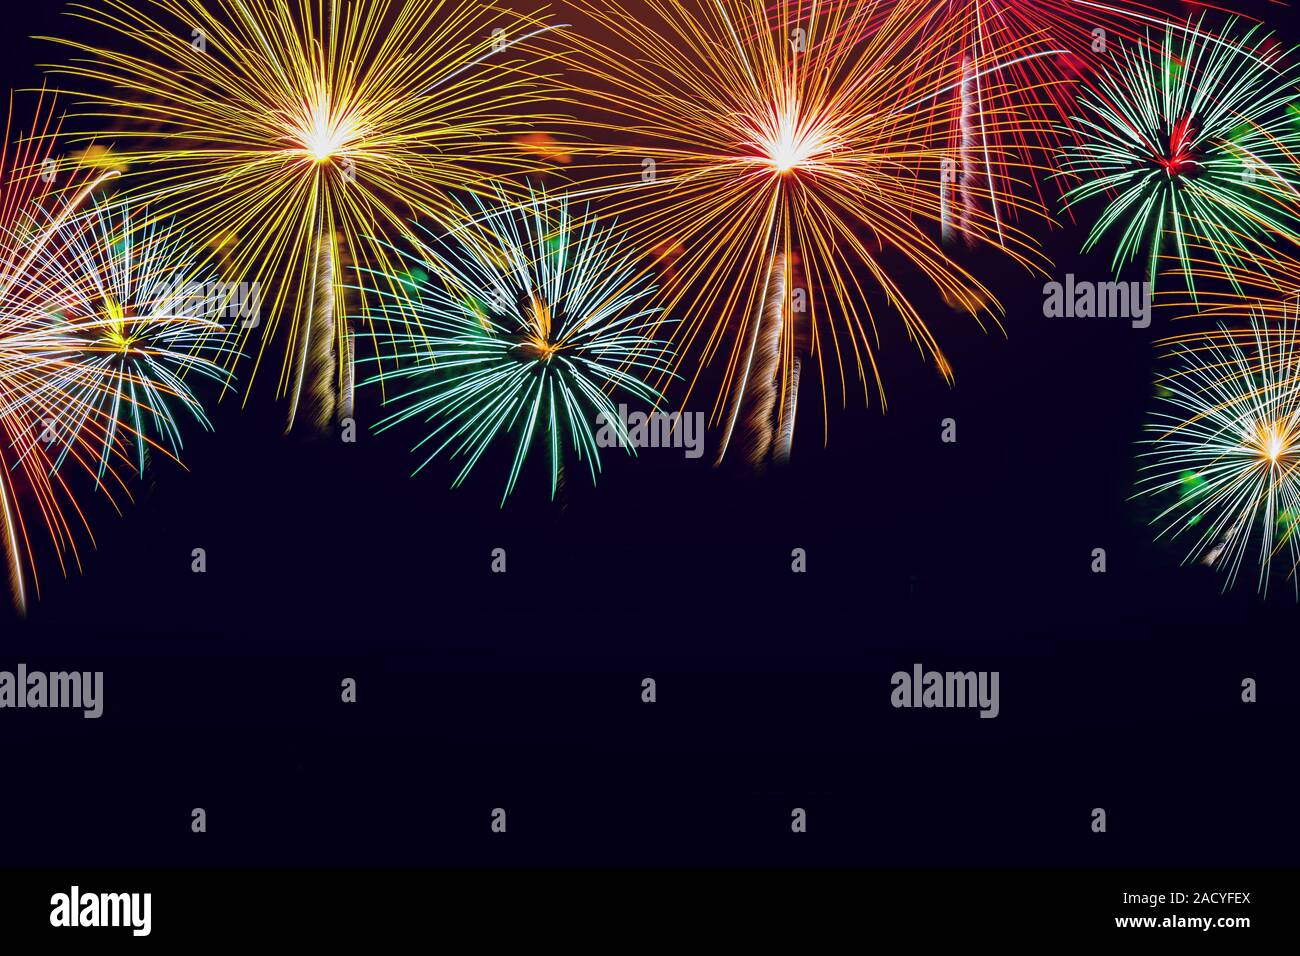 Fireworks on night sky background for your holiday, christmas, New Year and celebration theme concept design. Stock Photo